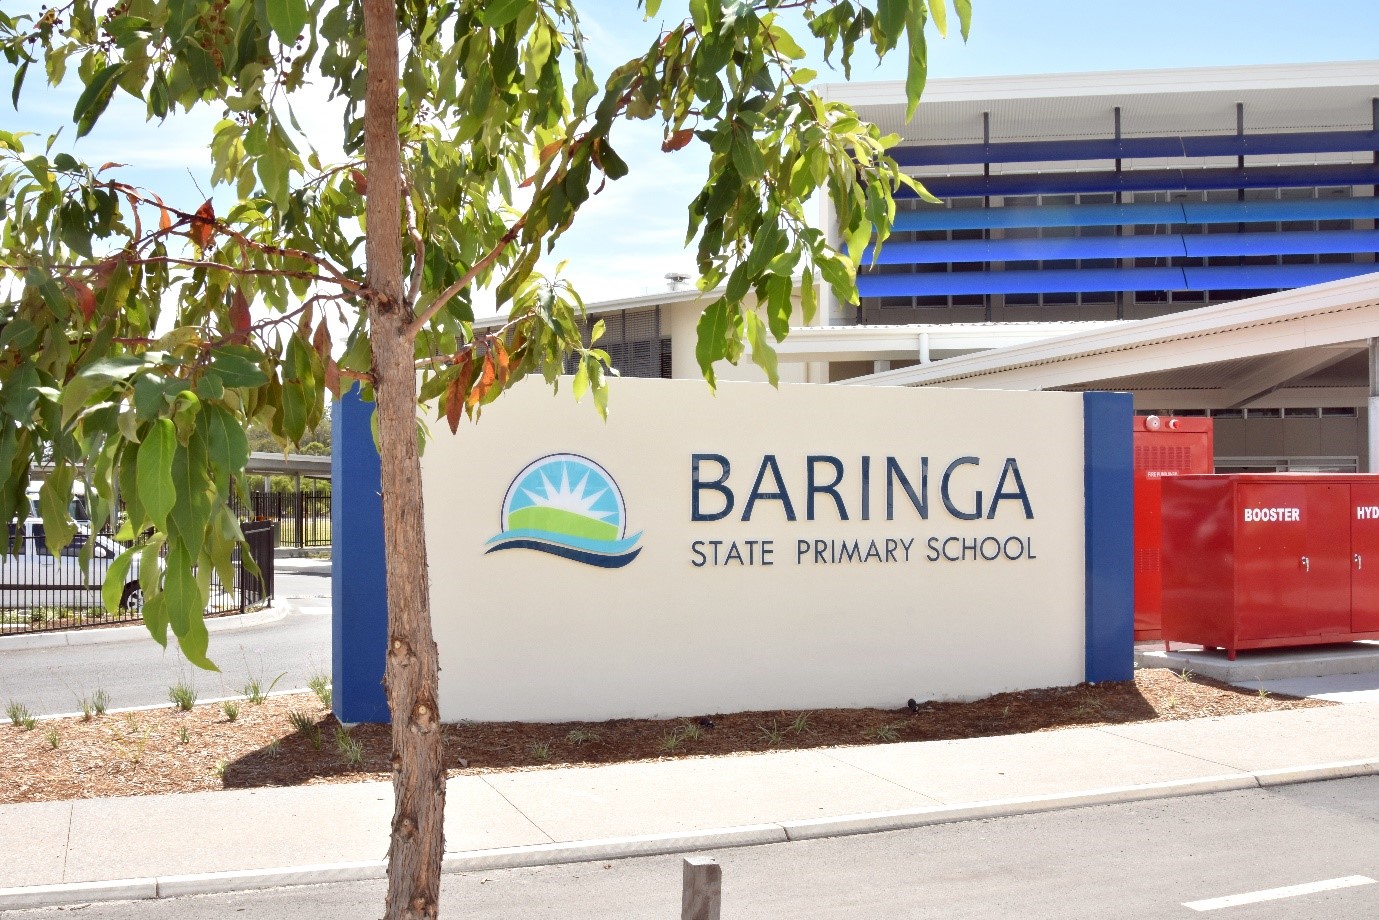 Image of Baringa State Primary School Entrance with Logo